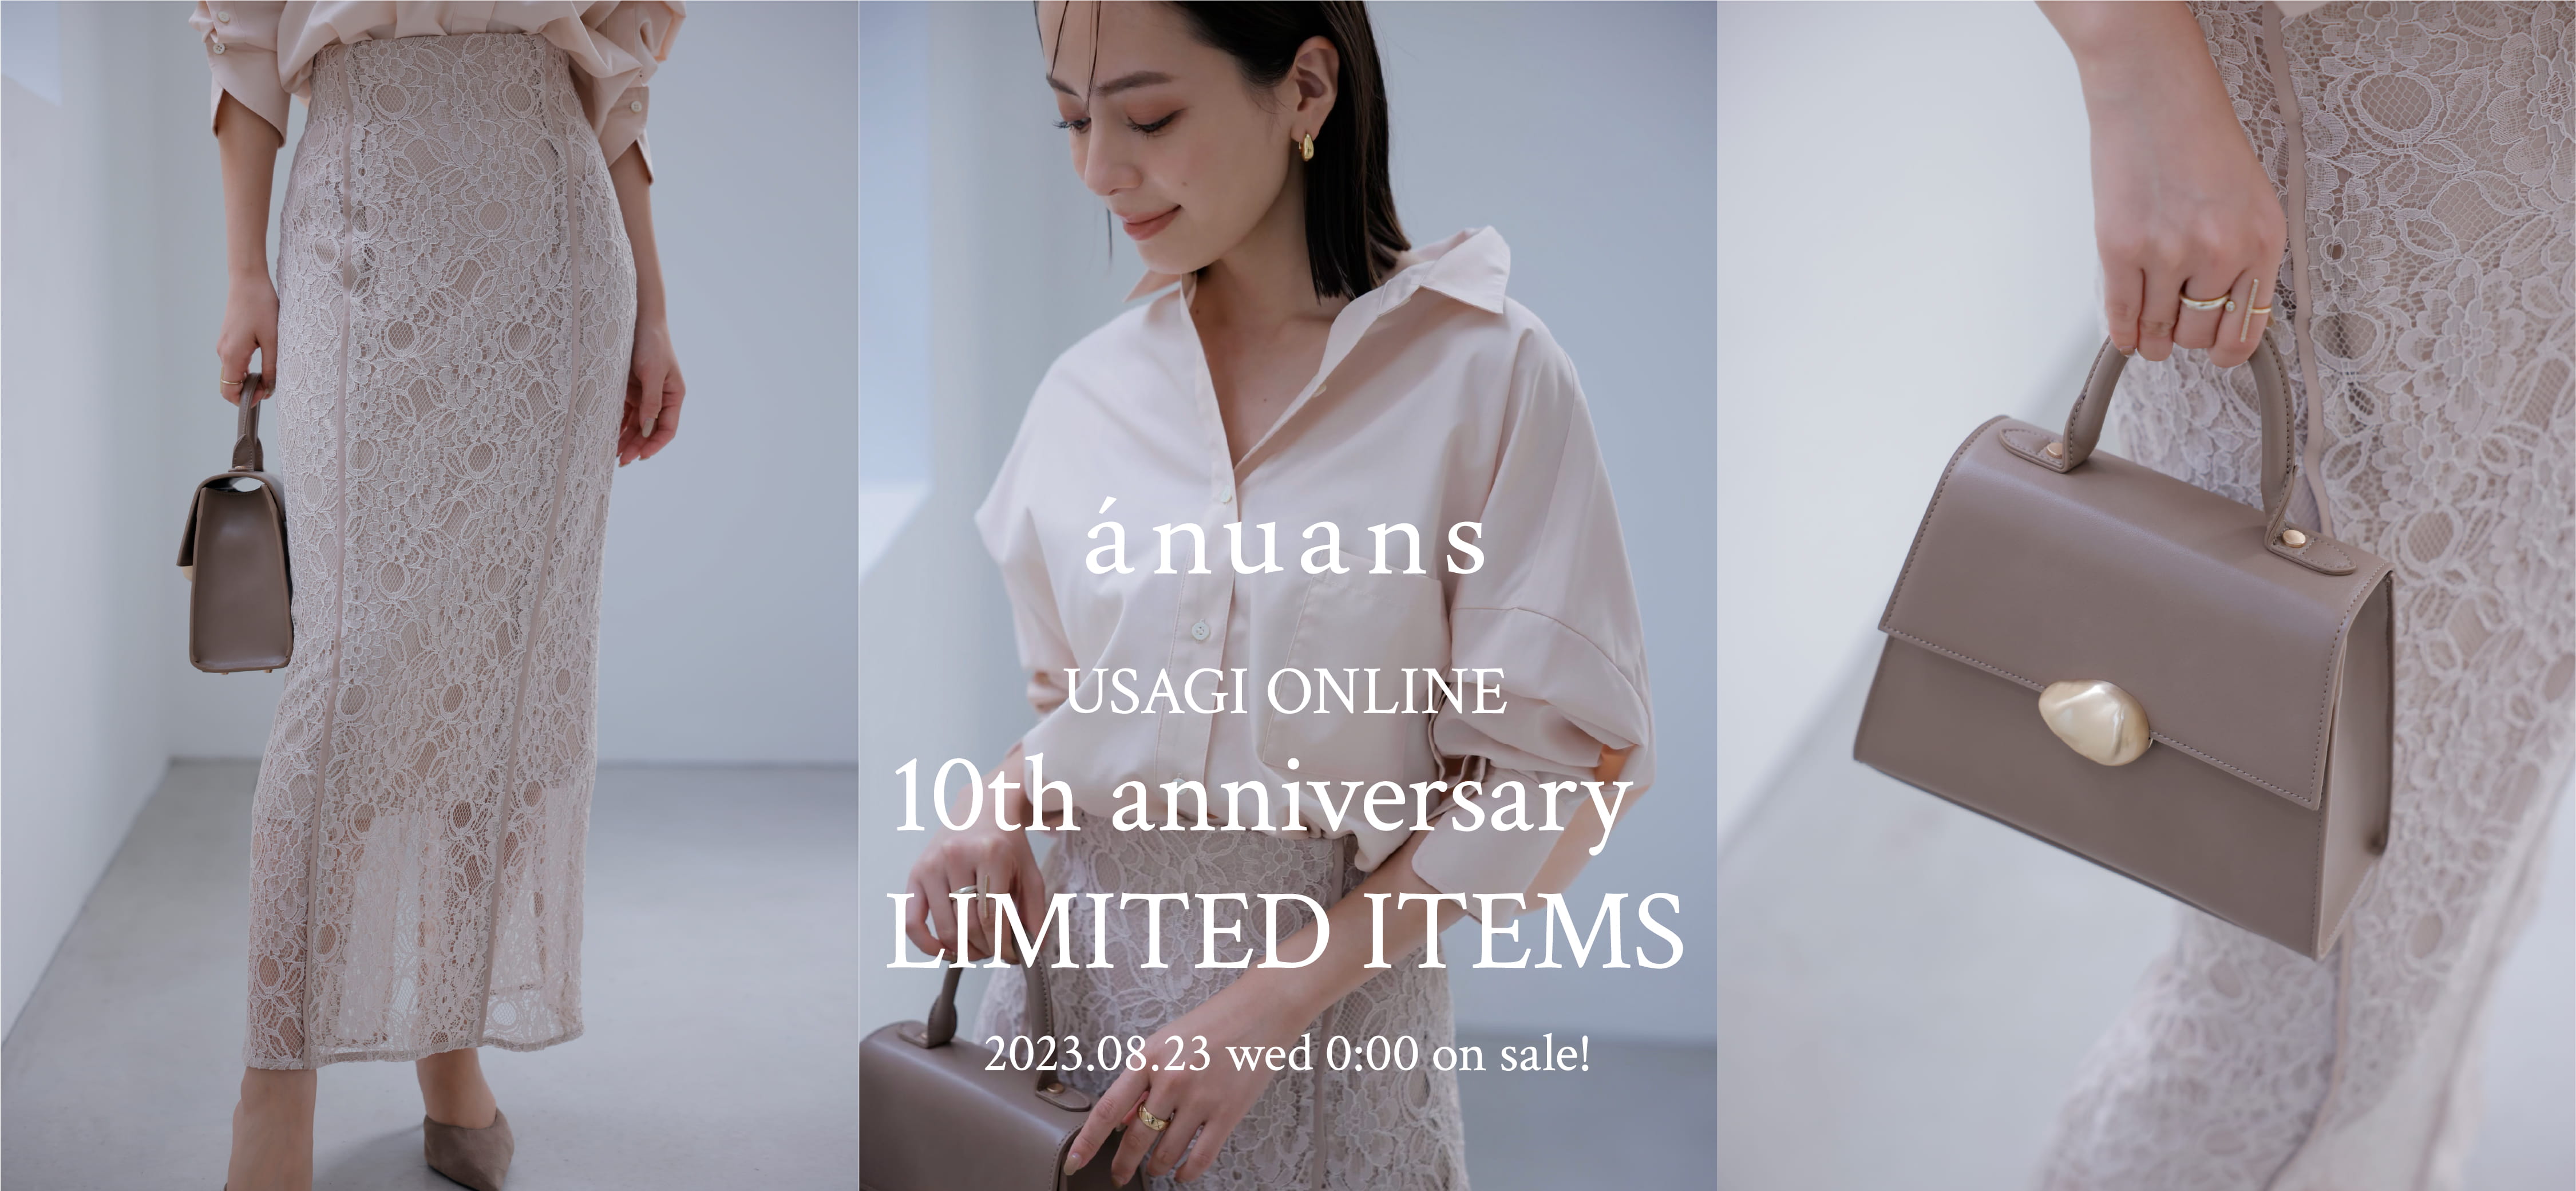 ánuans USAGI ONLINE 10th anniversary LIMITED ITEMS 2023.08.23 wed 0:00 on sale!